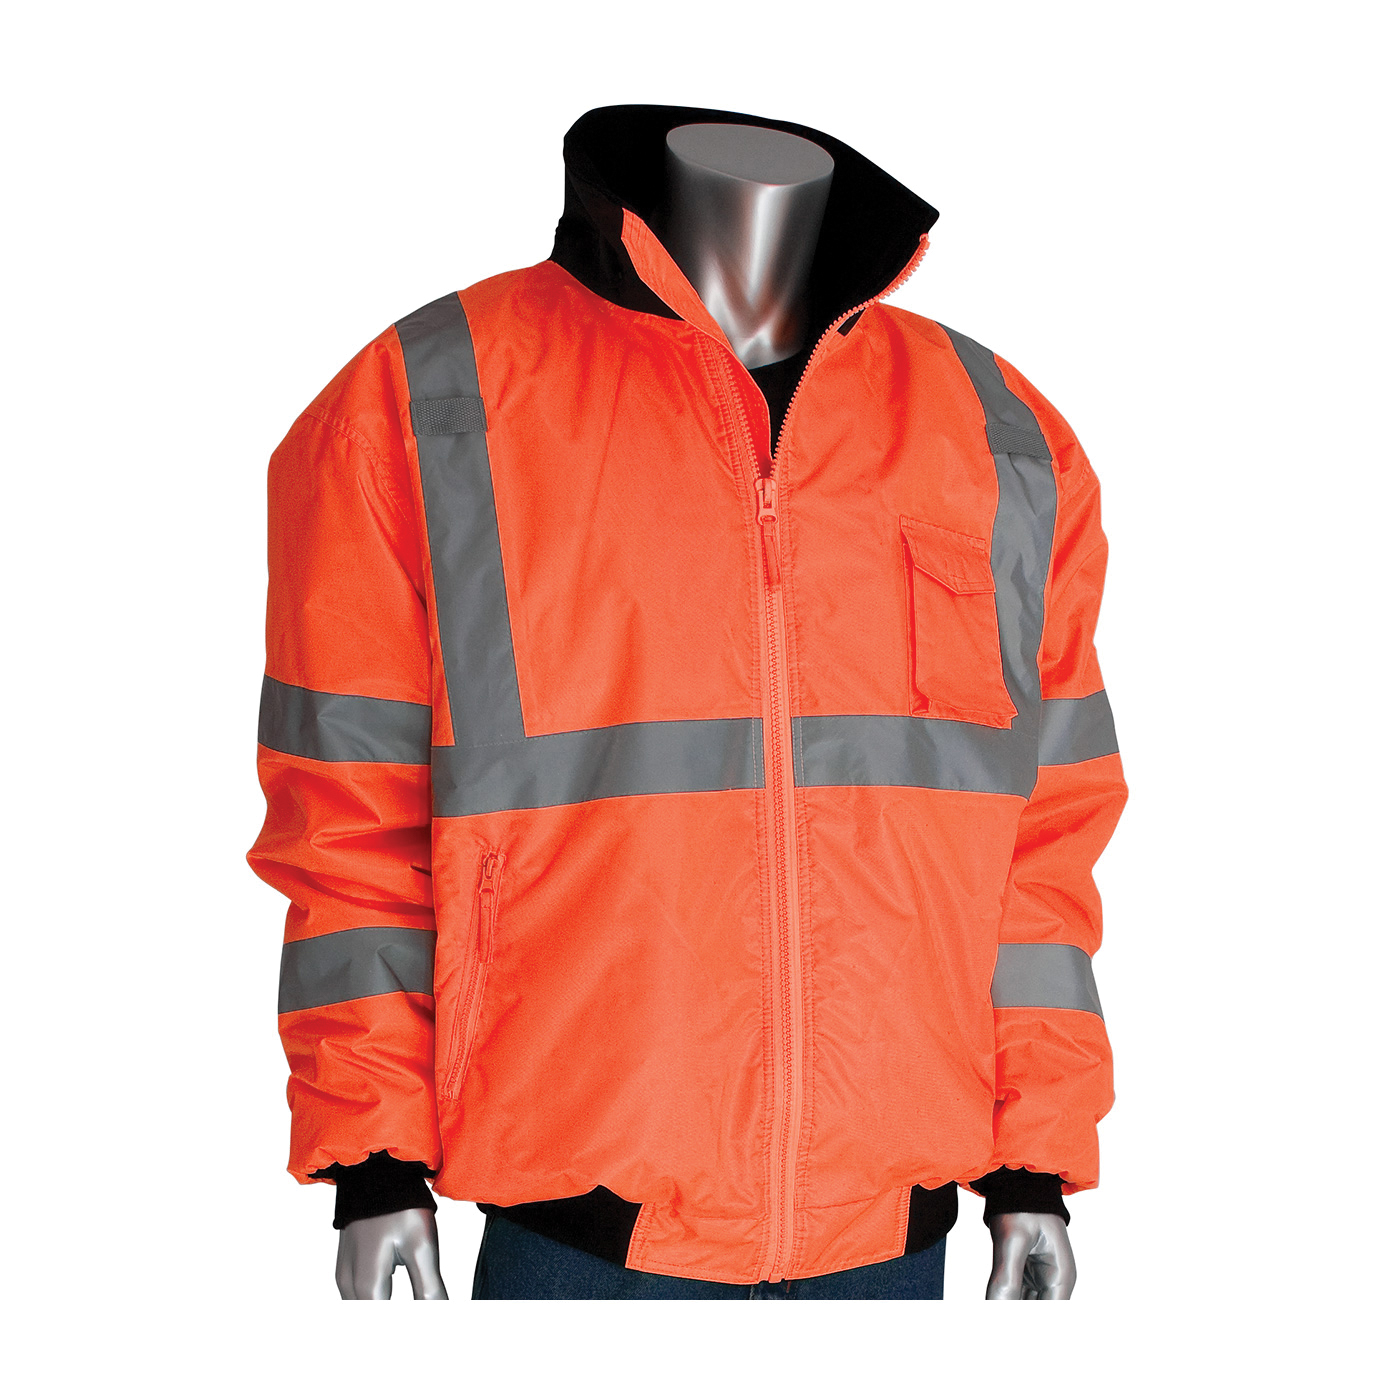 PIP® 333-1762-OR/5X Bomber Jacket With Zip-Out Fleece Liner, Hi-Viz Lime Orange, Polyester, 74 in Chest, Resists: Water, Specifications Met: ANSI 107 Class 3 Type R